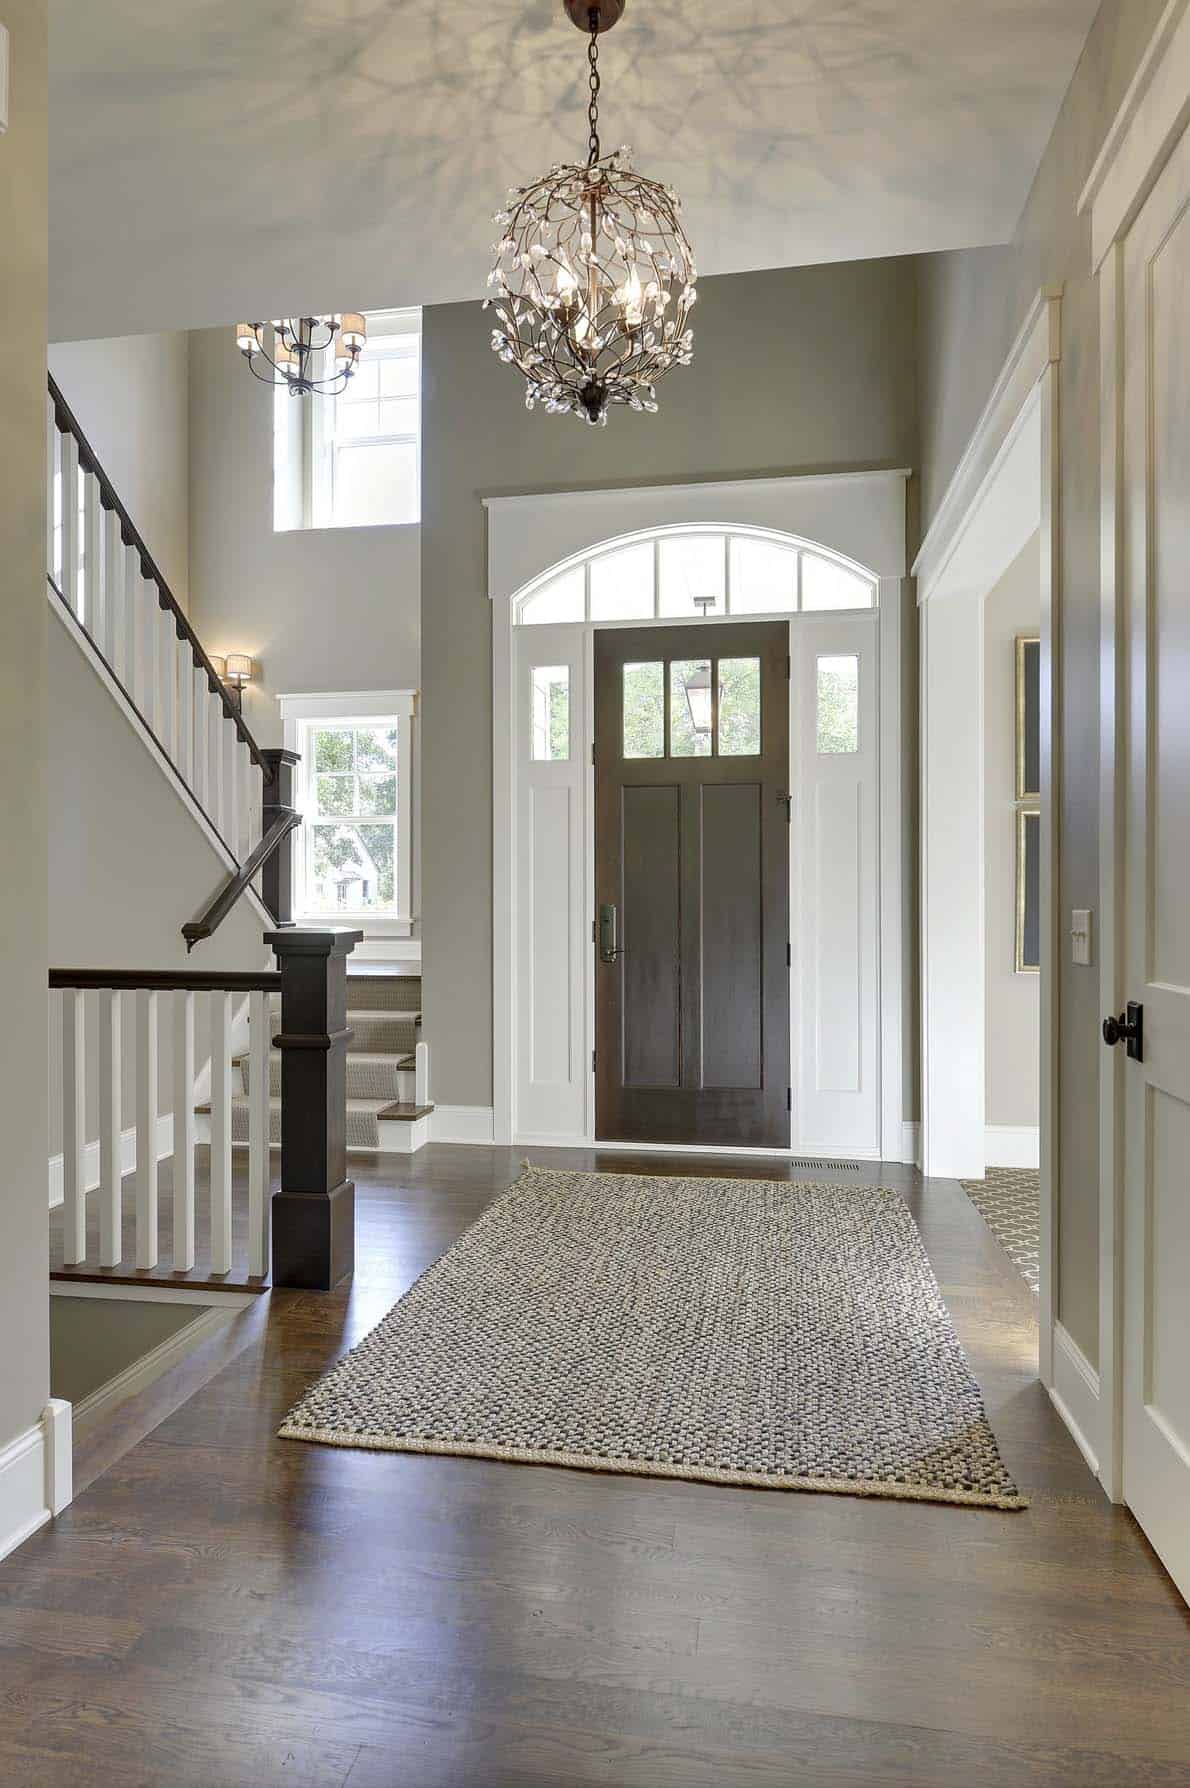 Statement making home entry